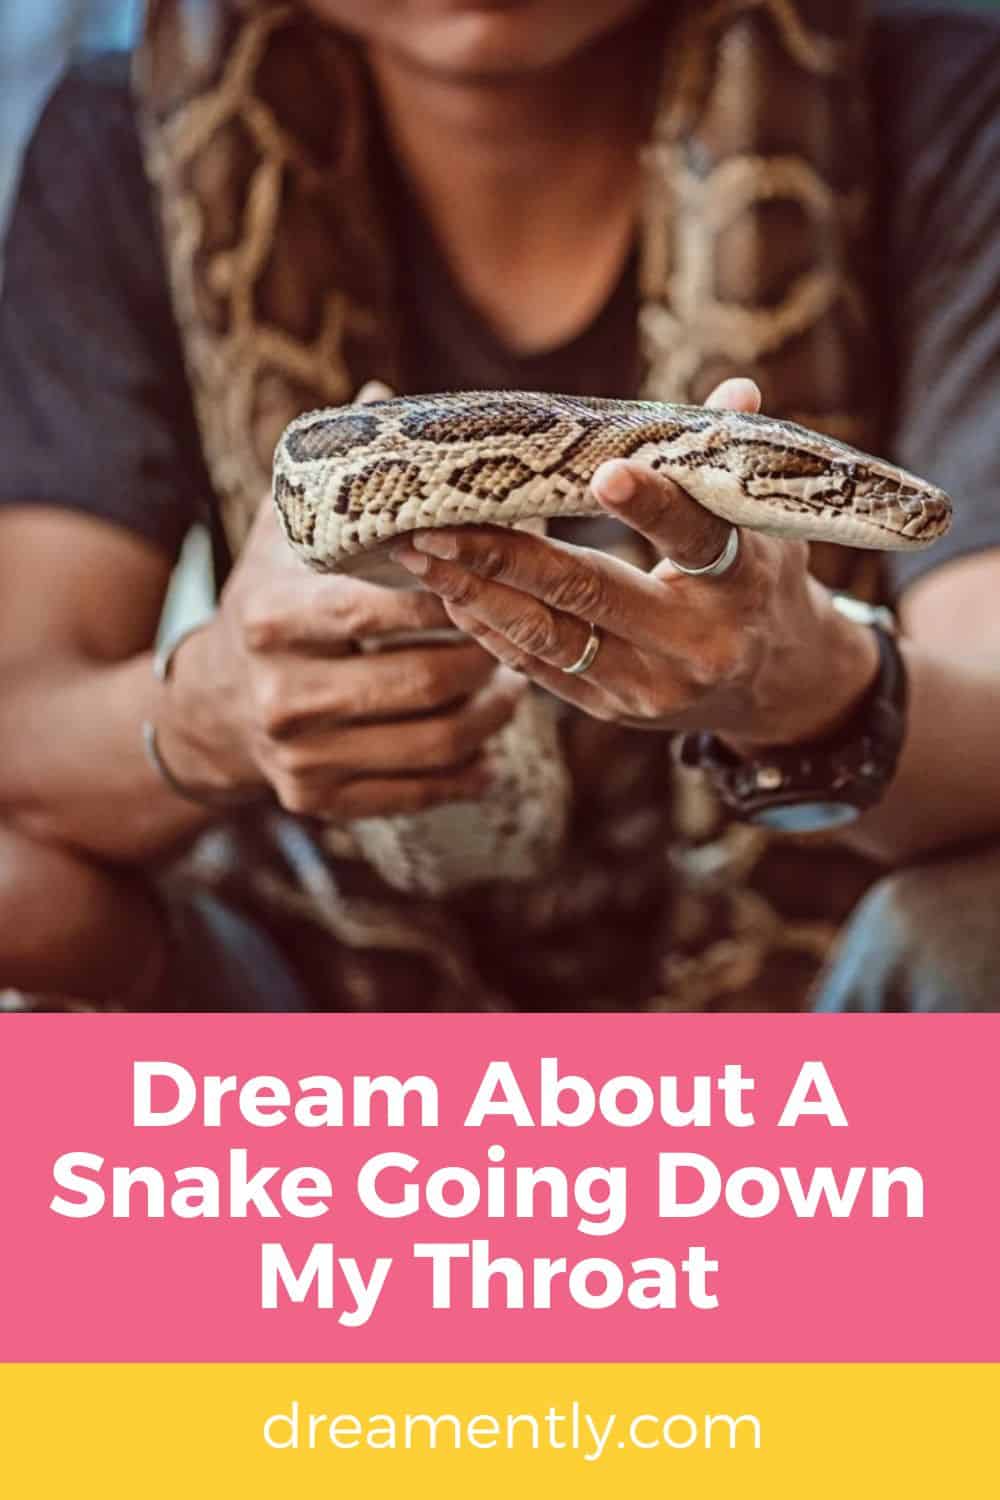 Dream About A Snake Going Down My Throat